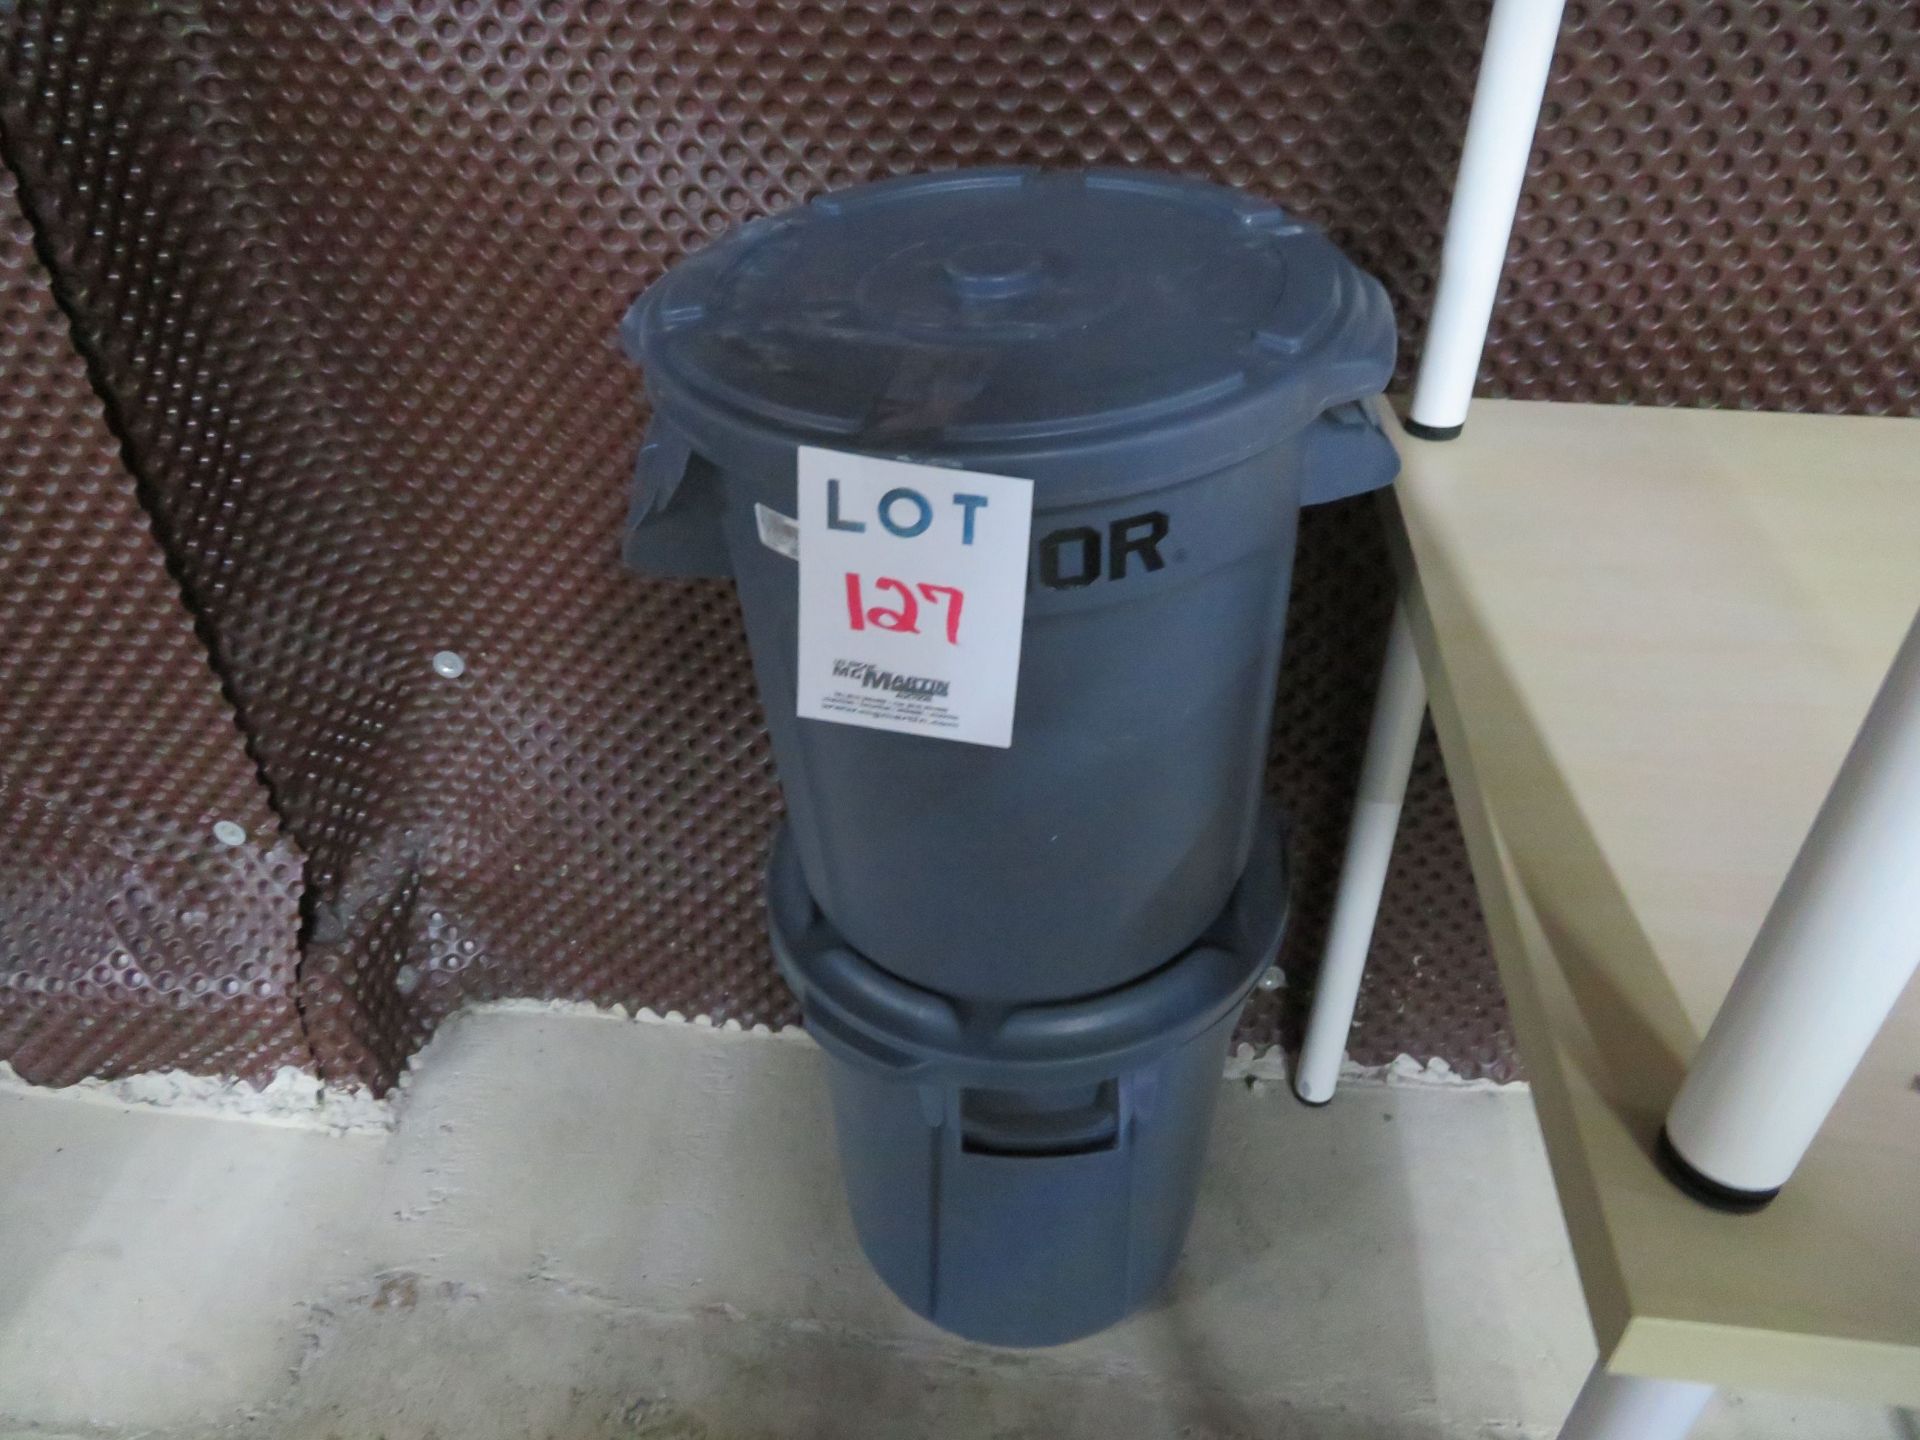 LOT including waste containers (qty 2) ****Please note that LOTS 1A-176 individually are subject